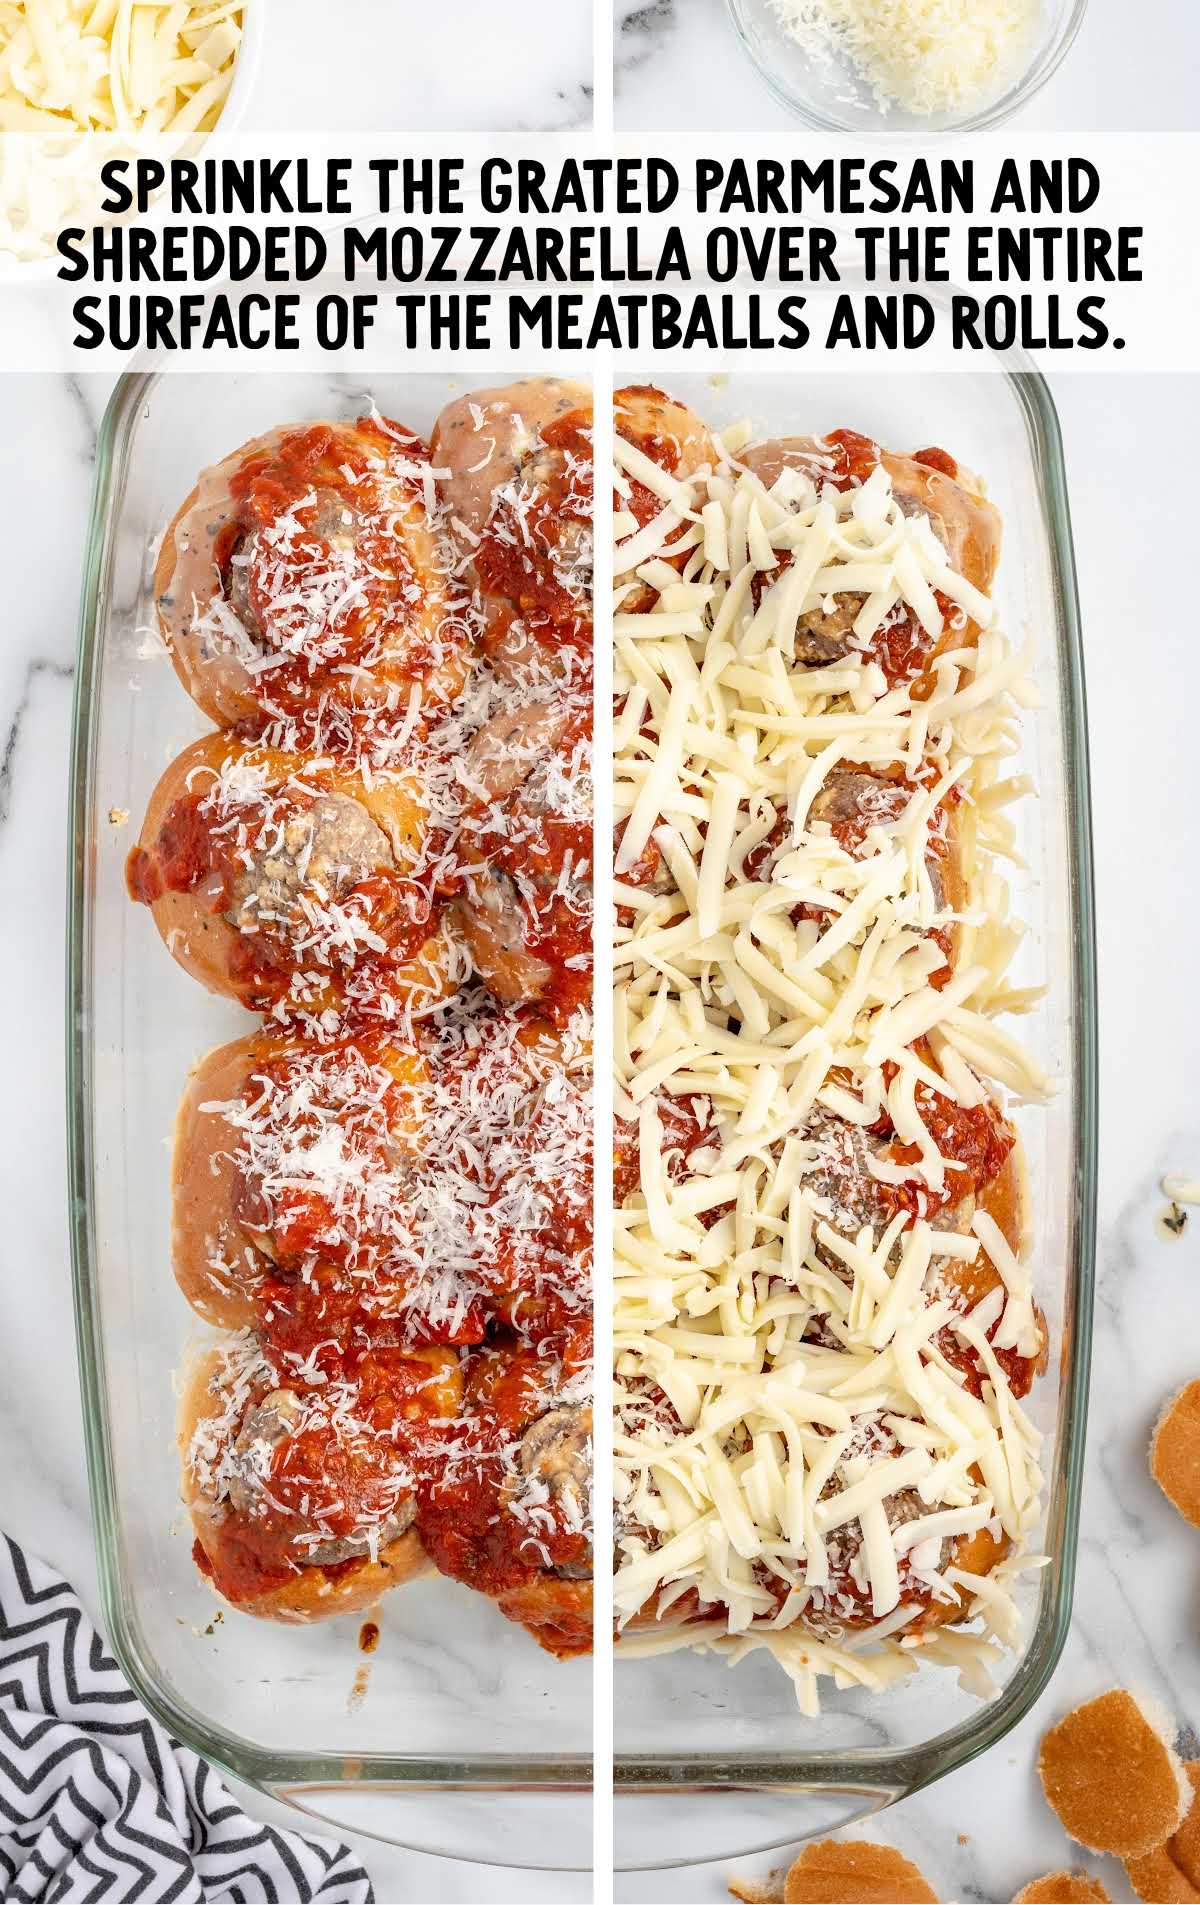 Parmesan and mozzarella cheese sprinkled over the meatballs in a baking dish